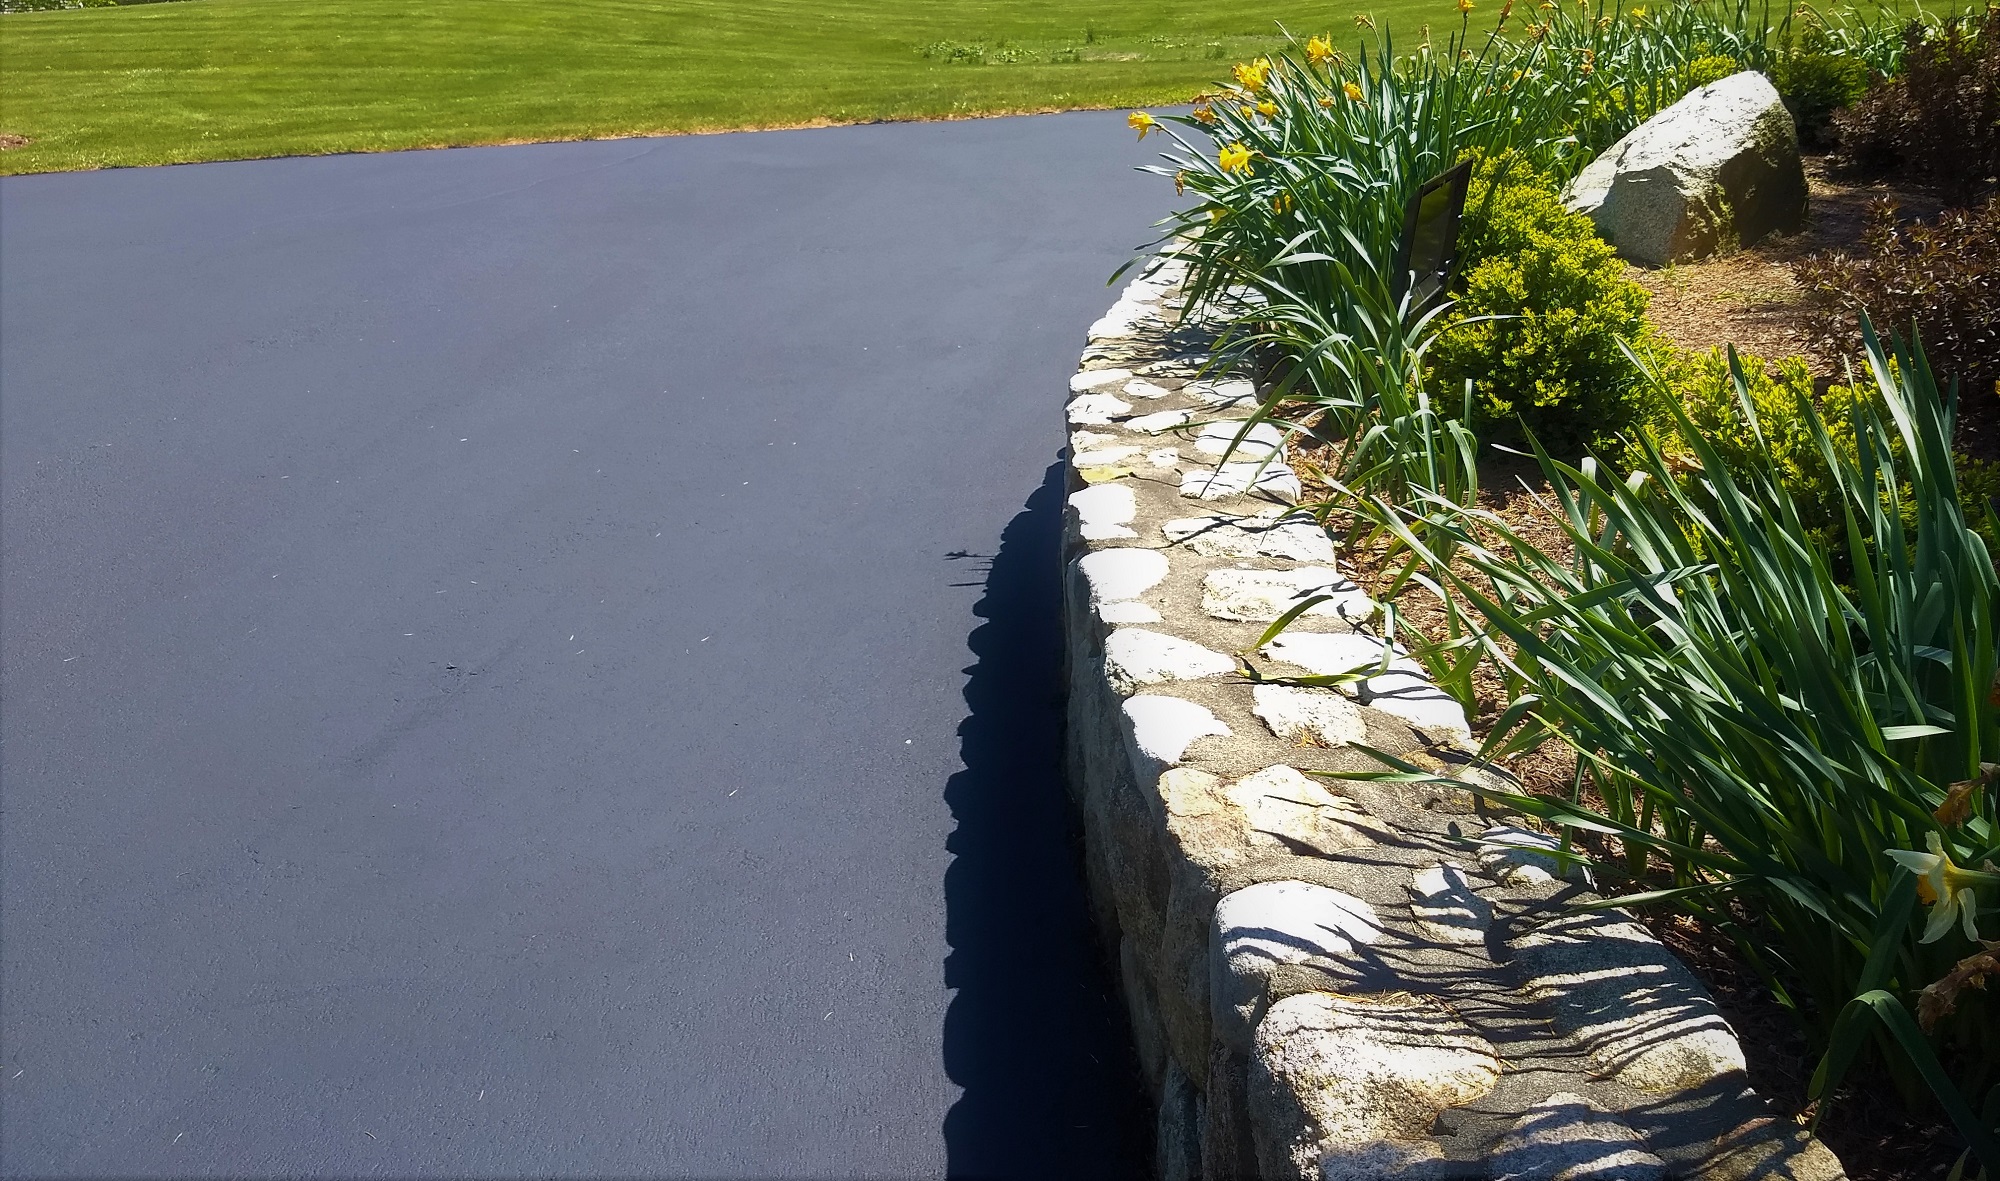 A curved stone wall and garden has an ultra neat appearance after new sealcoating.